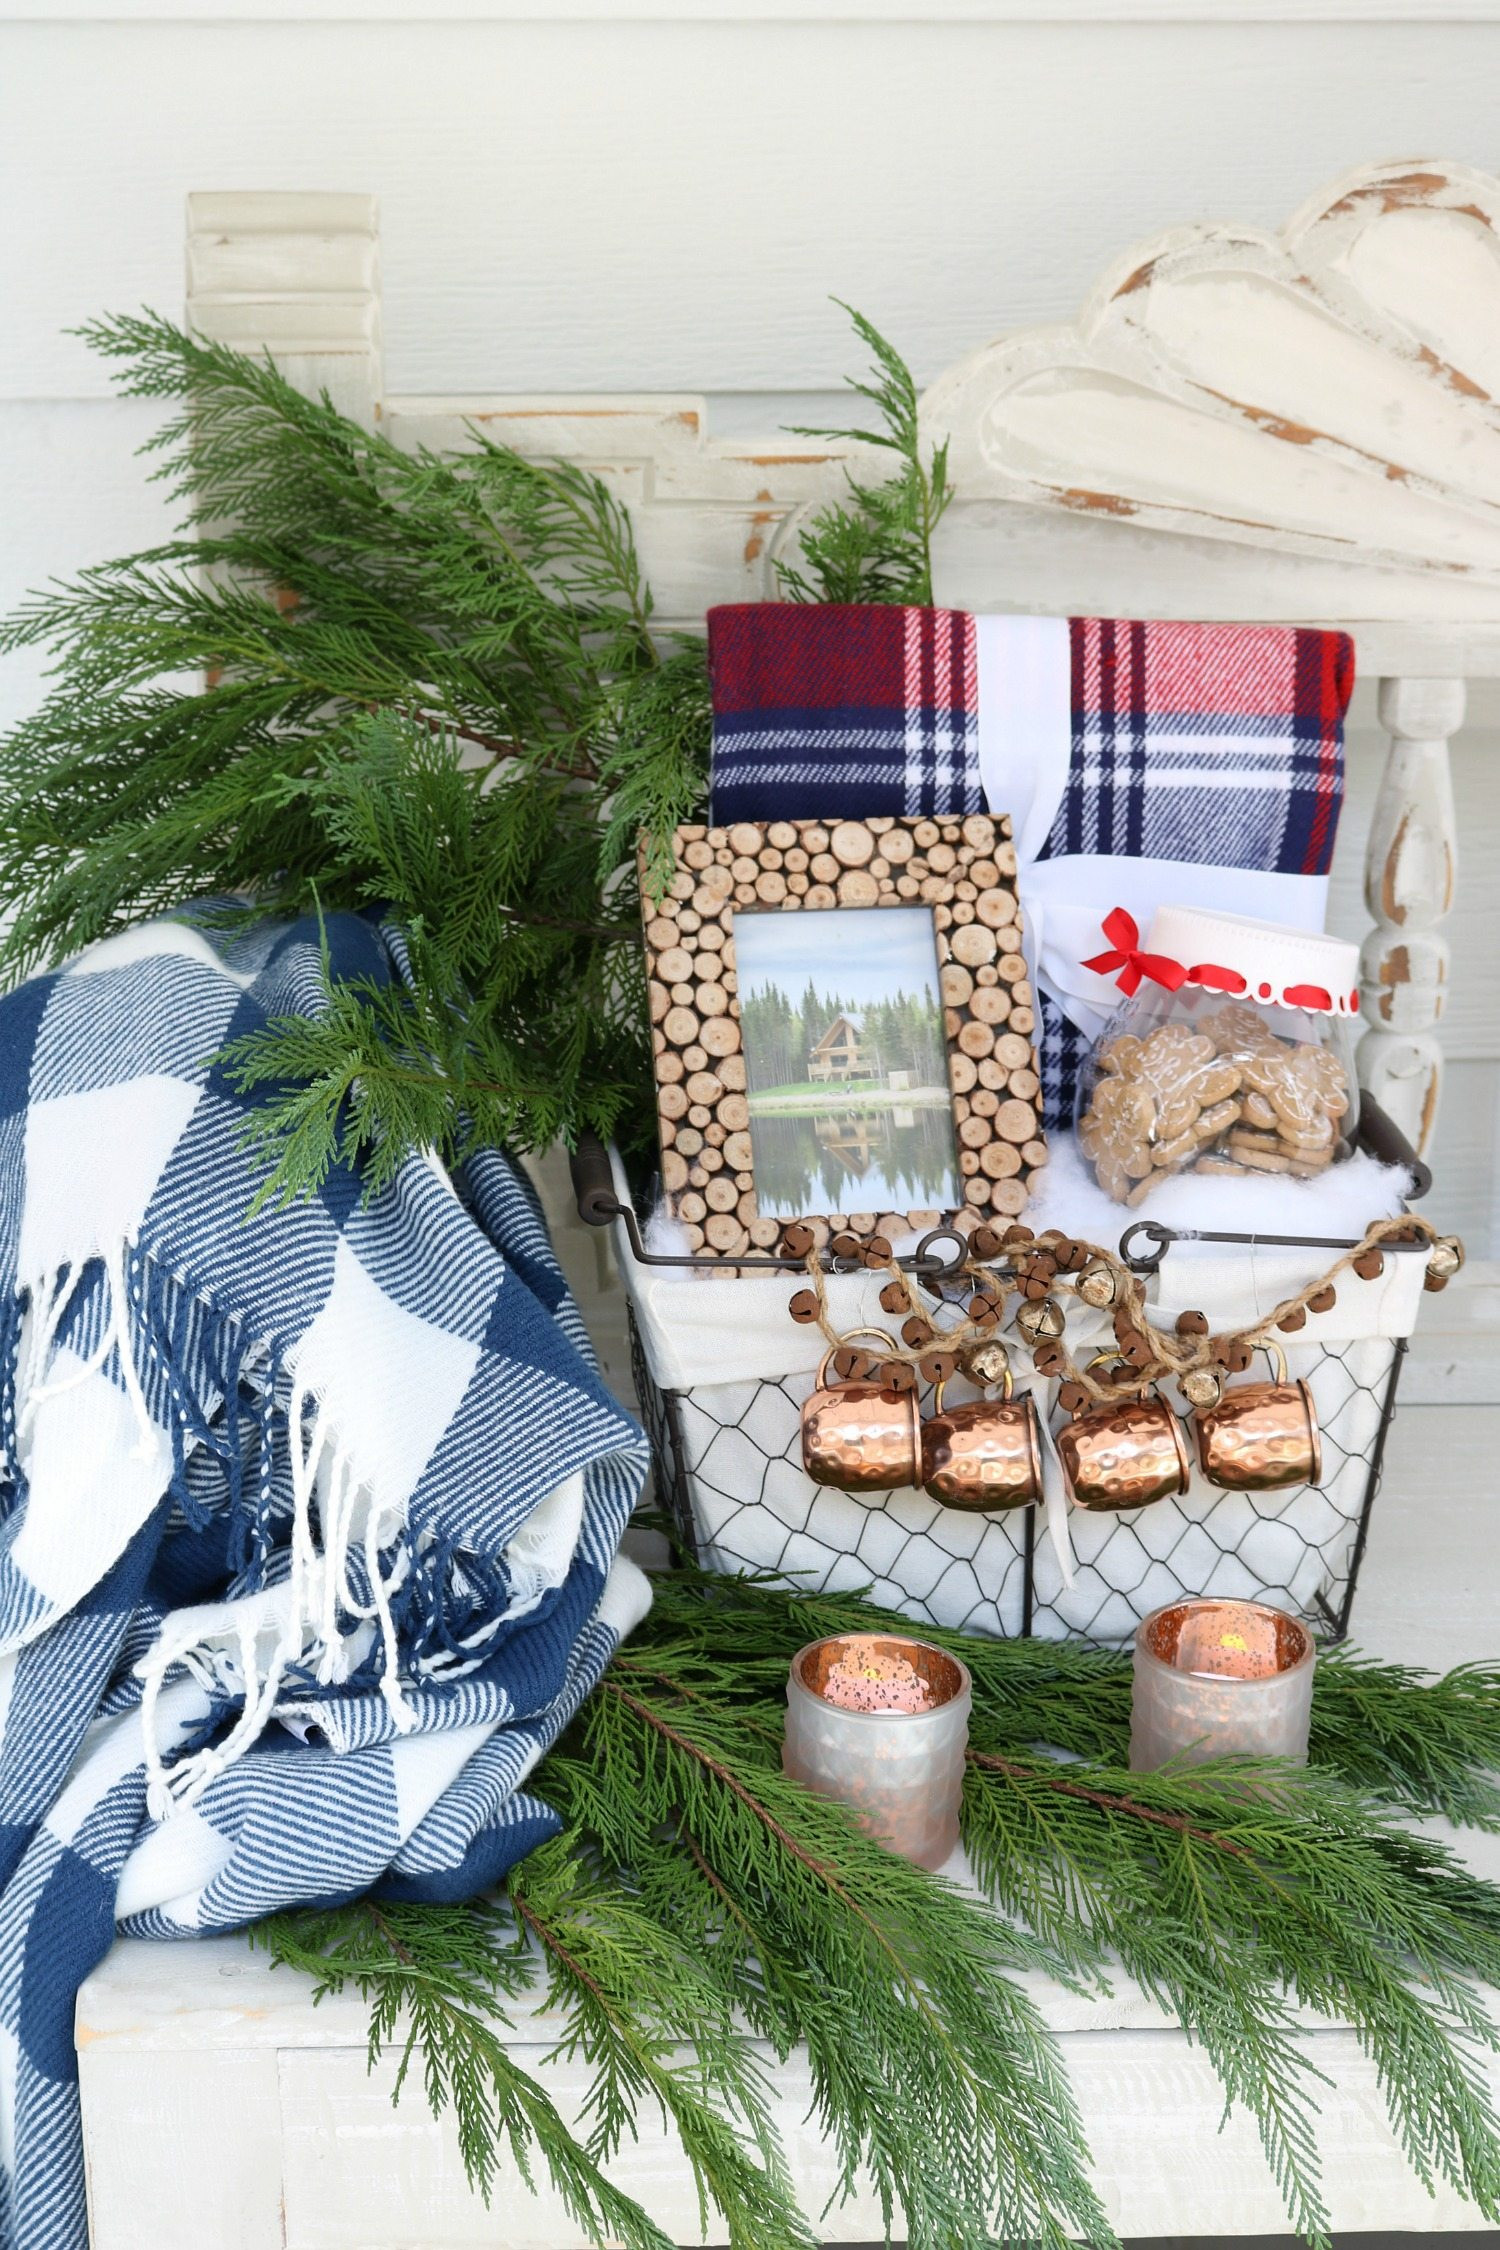 Warm And Cozy Gift Basket Ideas
 Affordable Christmas Gift Ideas